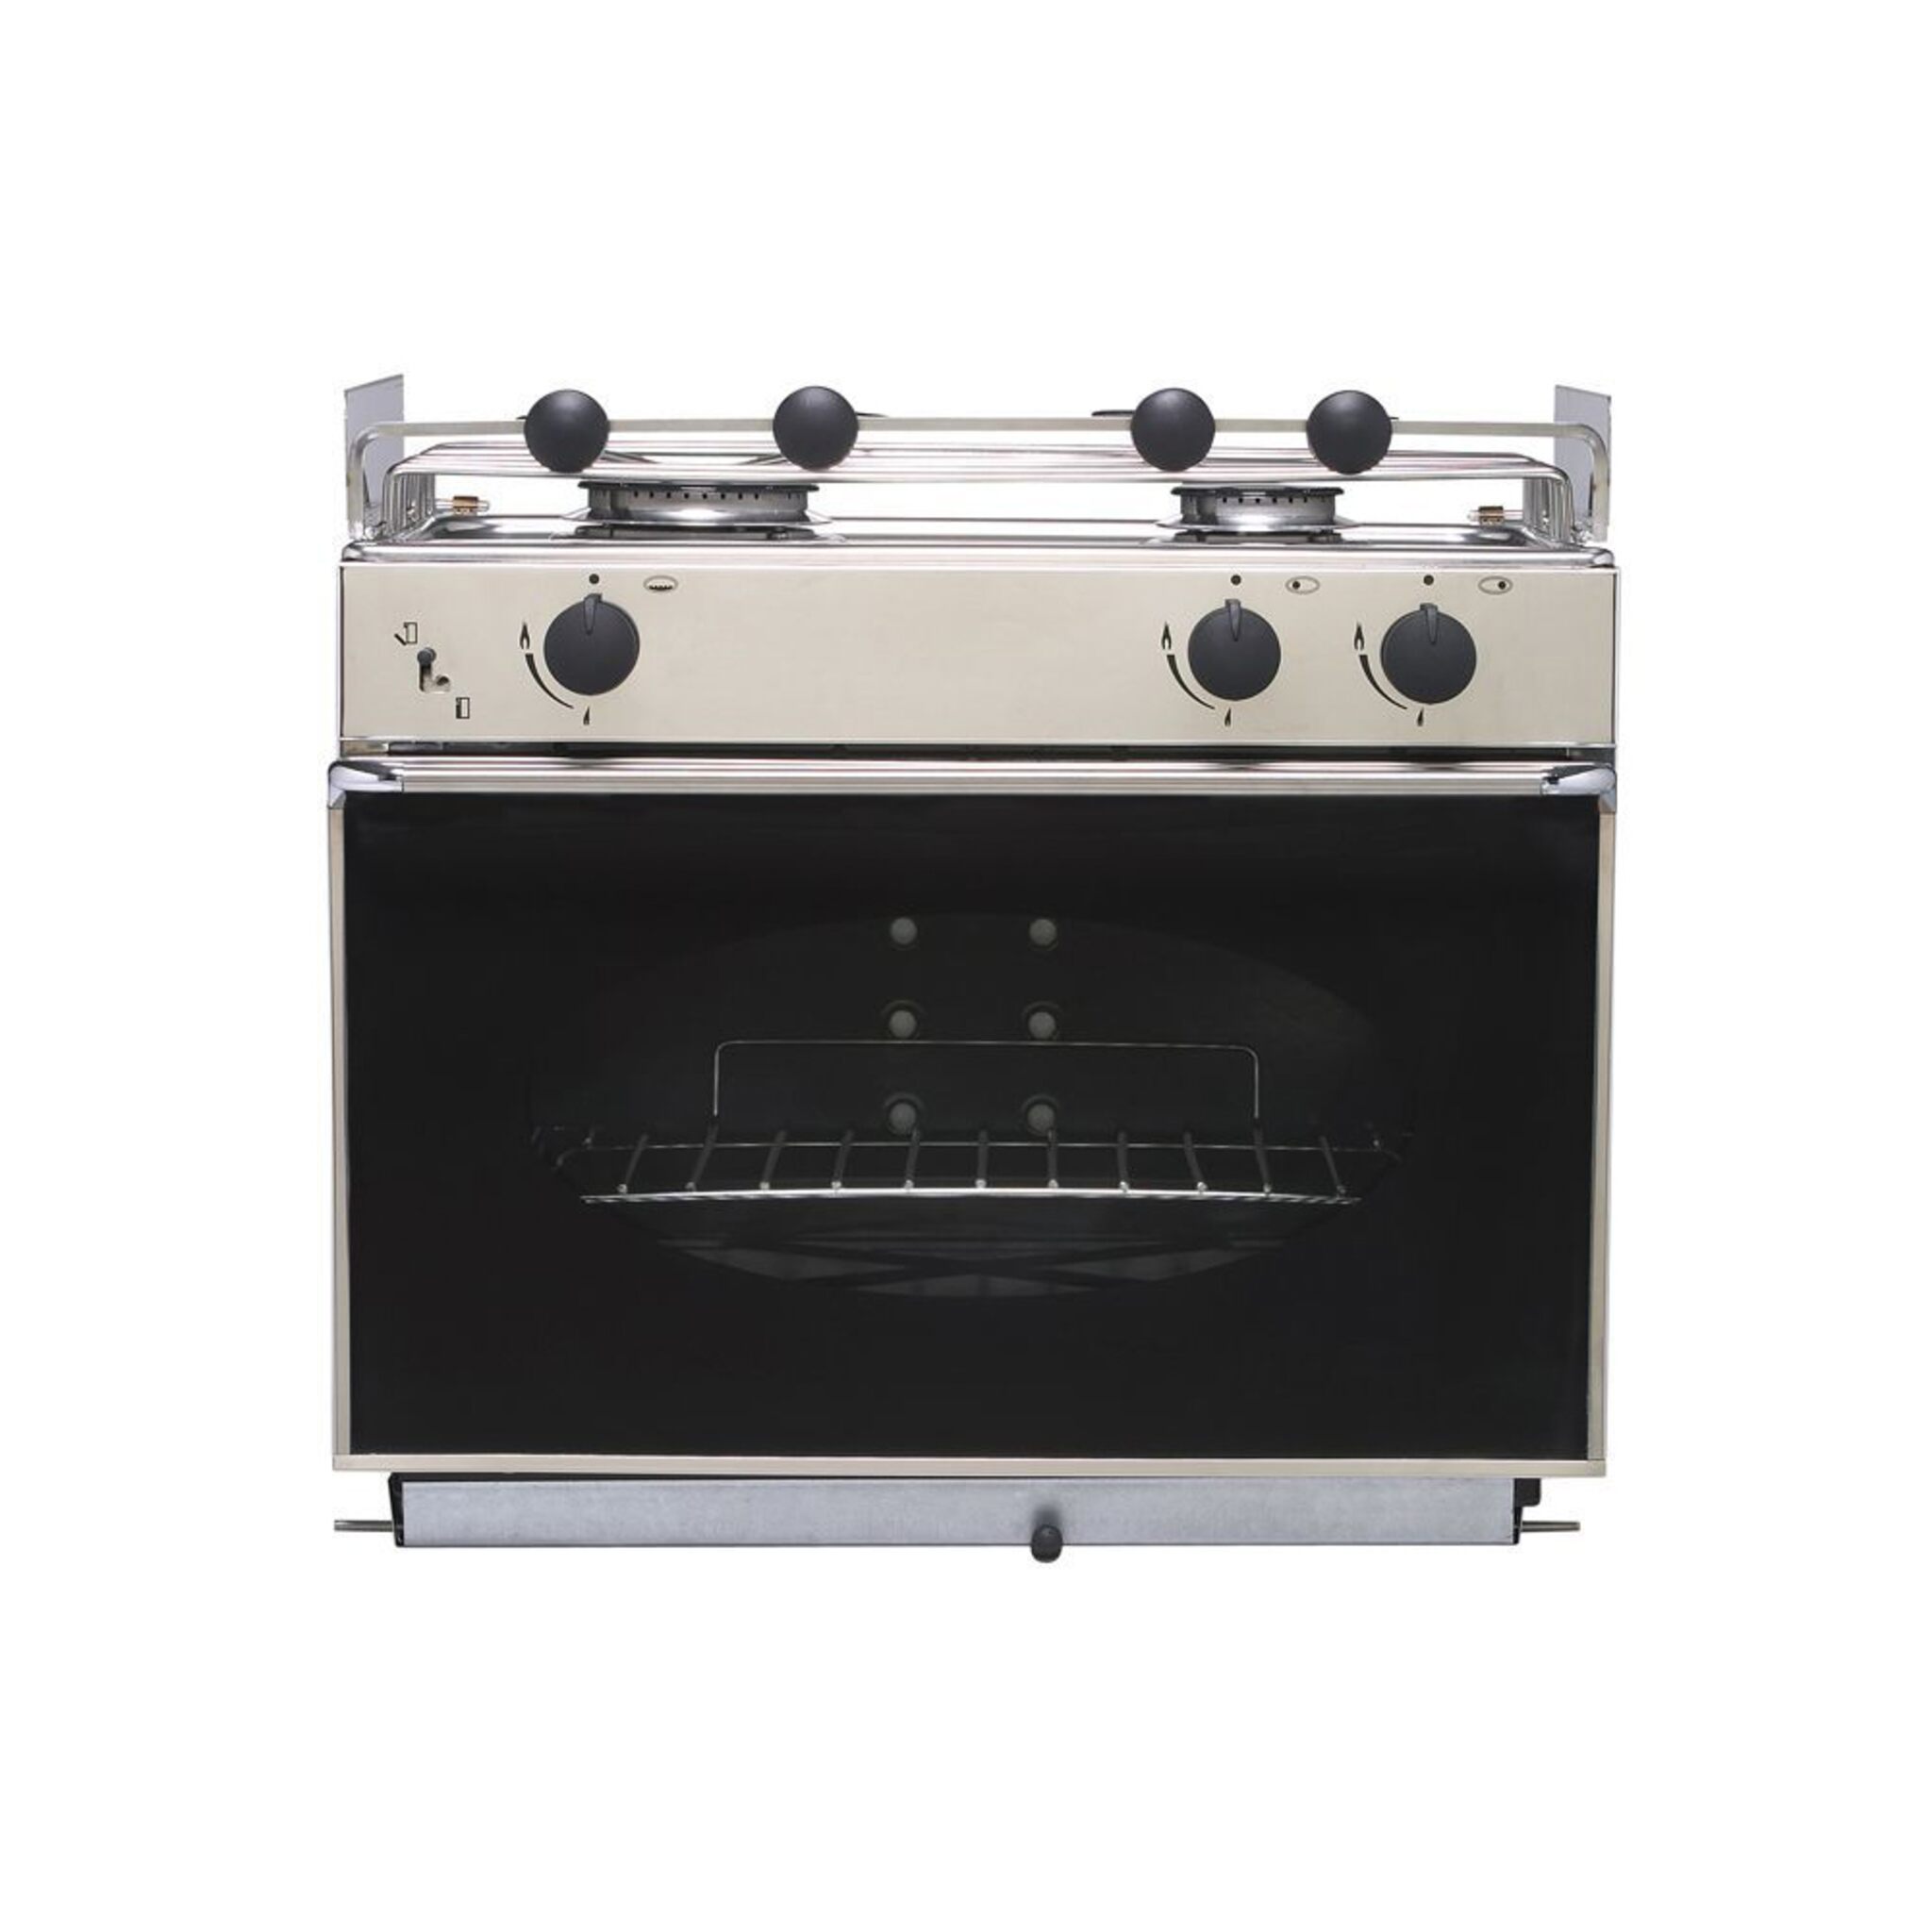 Eno the one 2 burner stove with oven